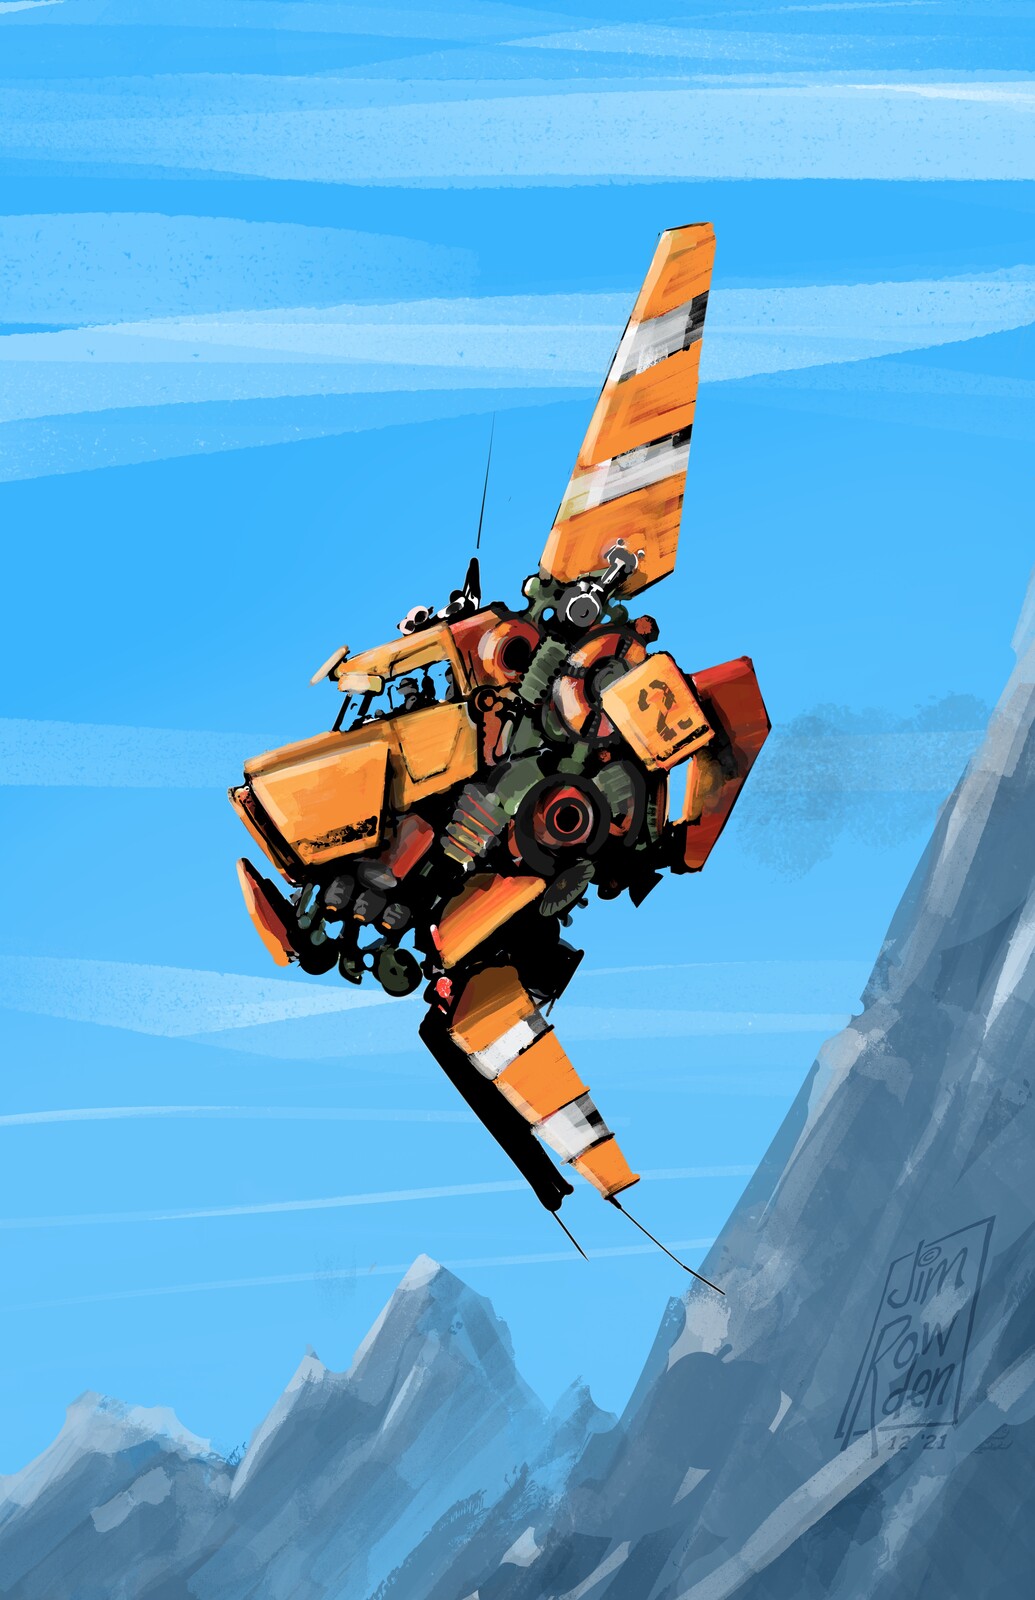 Clowning around with an Ian McQue inspired ship sketch.